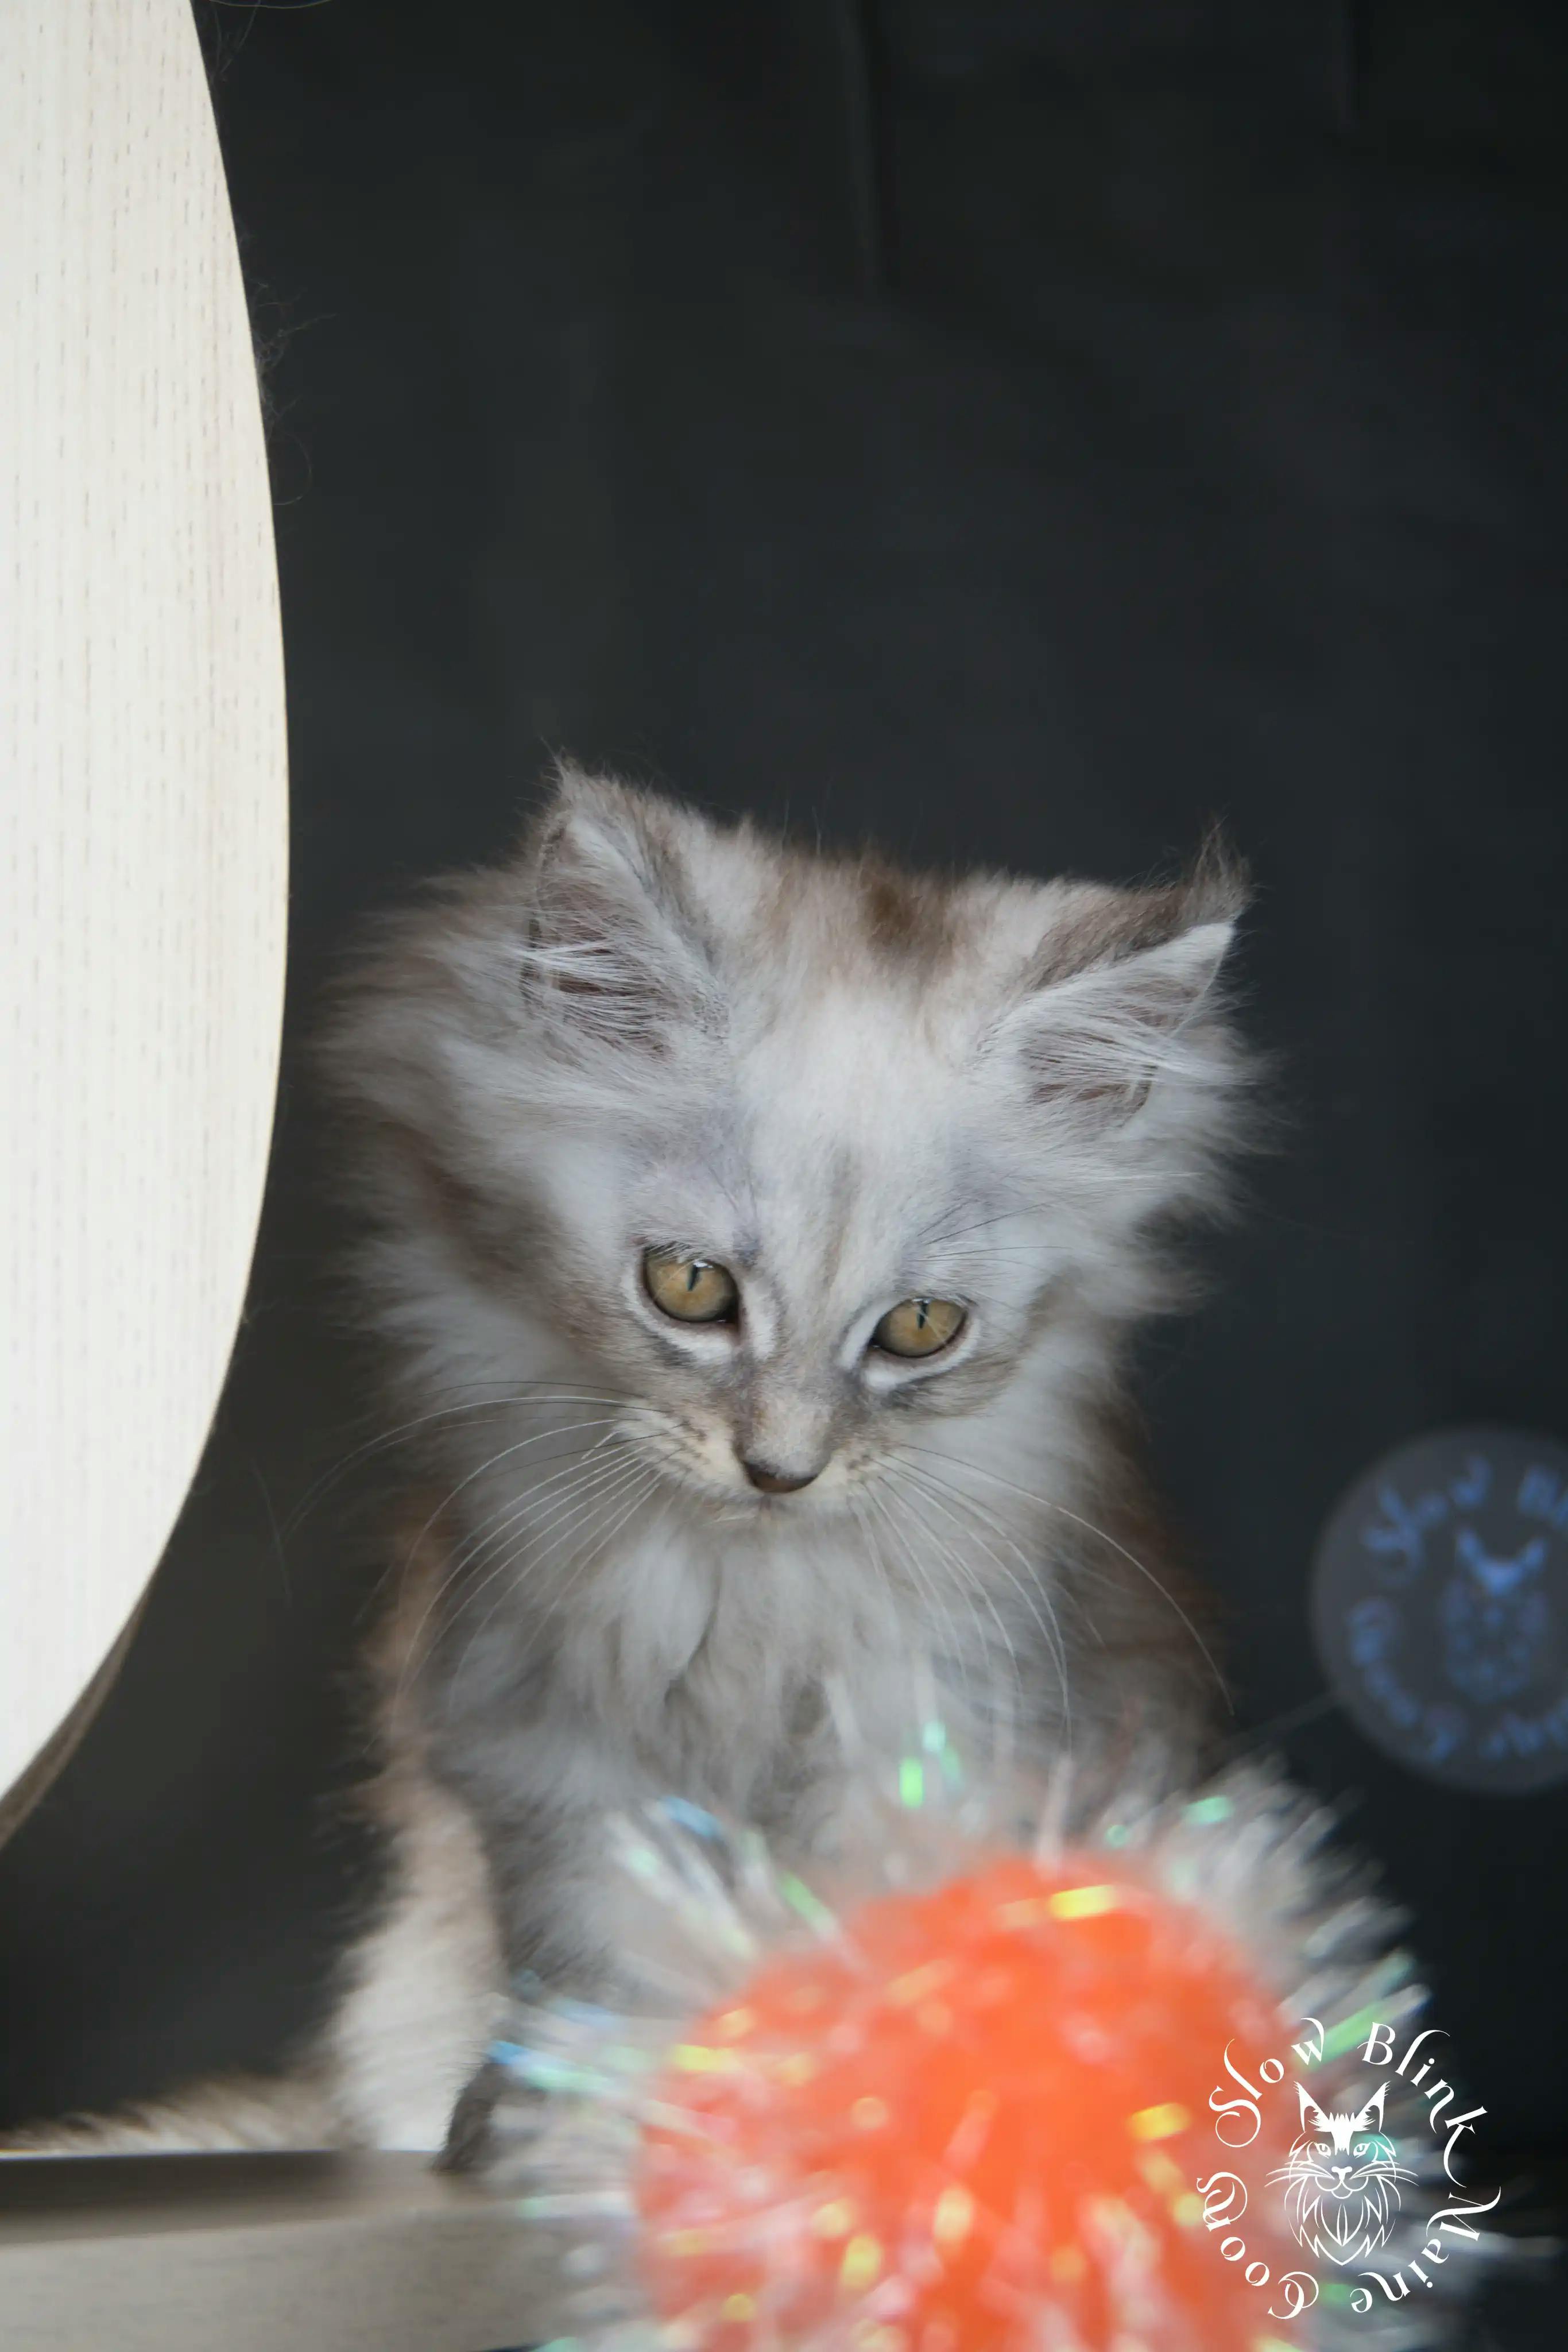 High Silver Maine Coon Kittens > black silver tabby maine coon kitten | ems code ns 22 23 24 25 | slowblinkmainecoons | 600